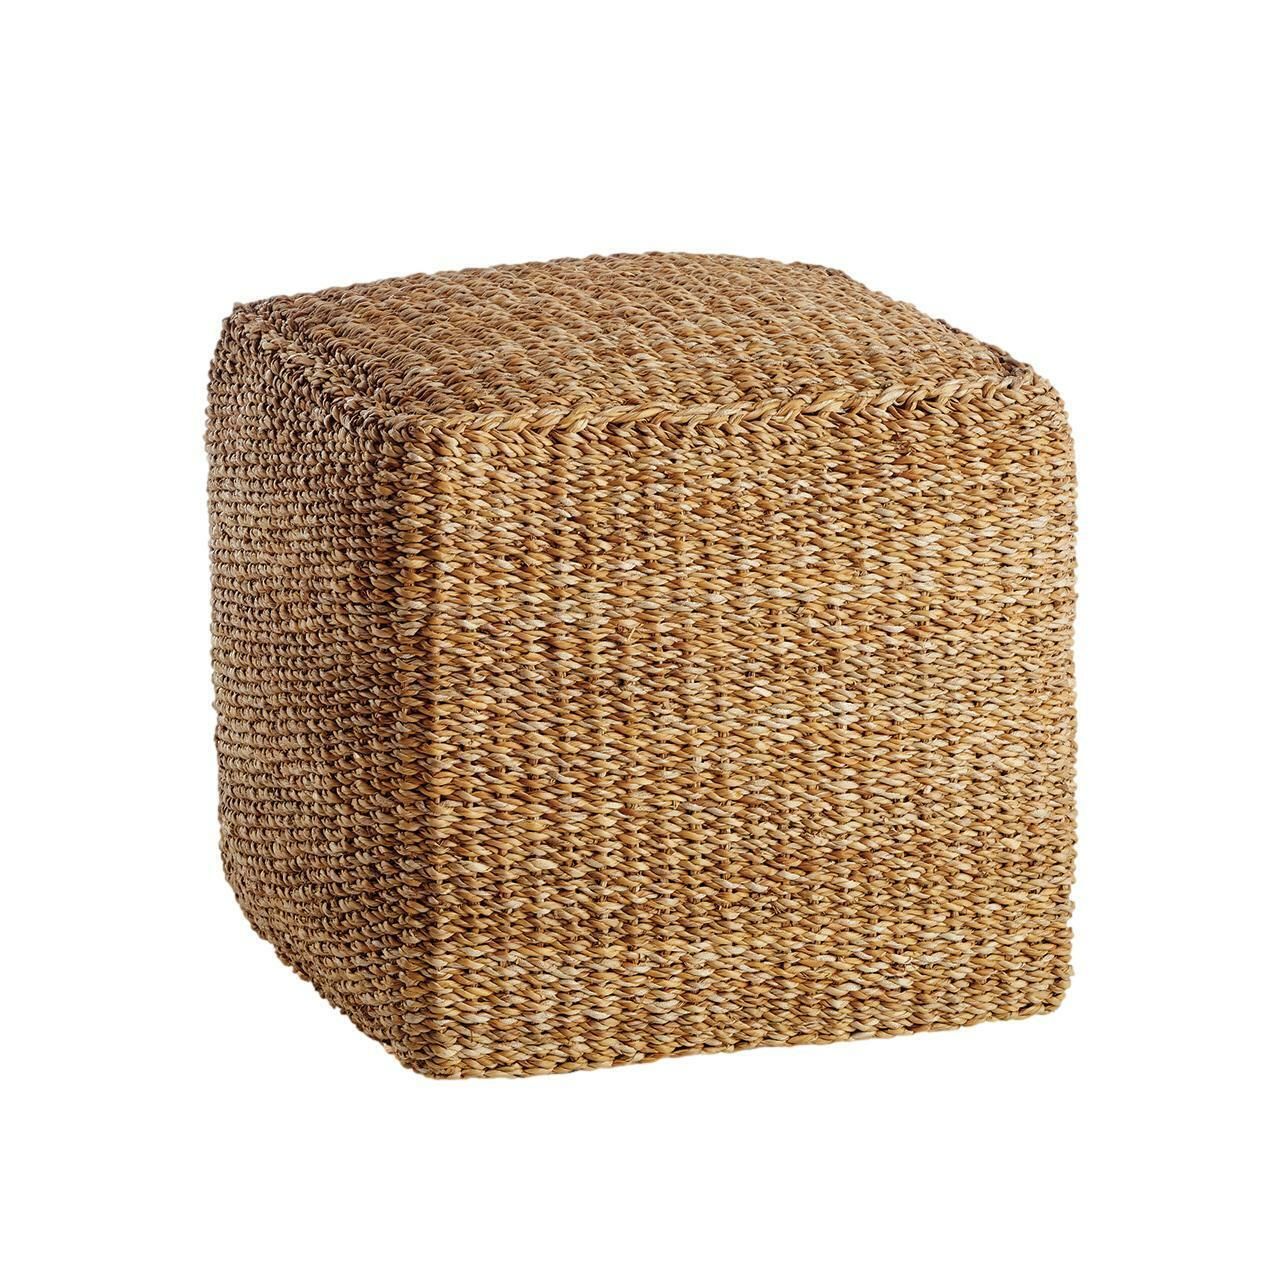 Casual Woven Seagrass Square Cube Pouf Natural Coastal Cottage Ottoman  Table | Ebay With Regard To Natural Ottomans (View 11 of 15)